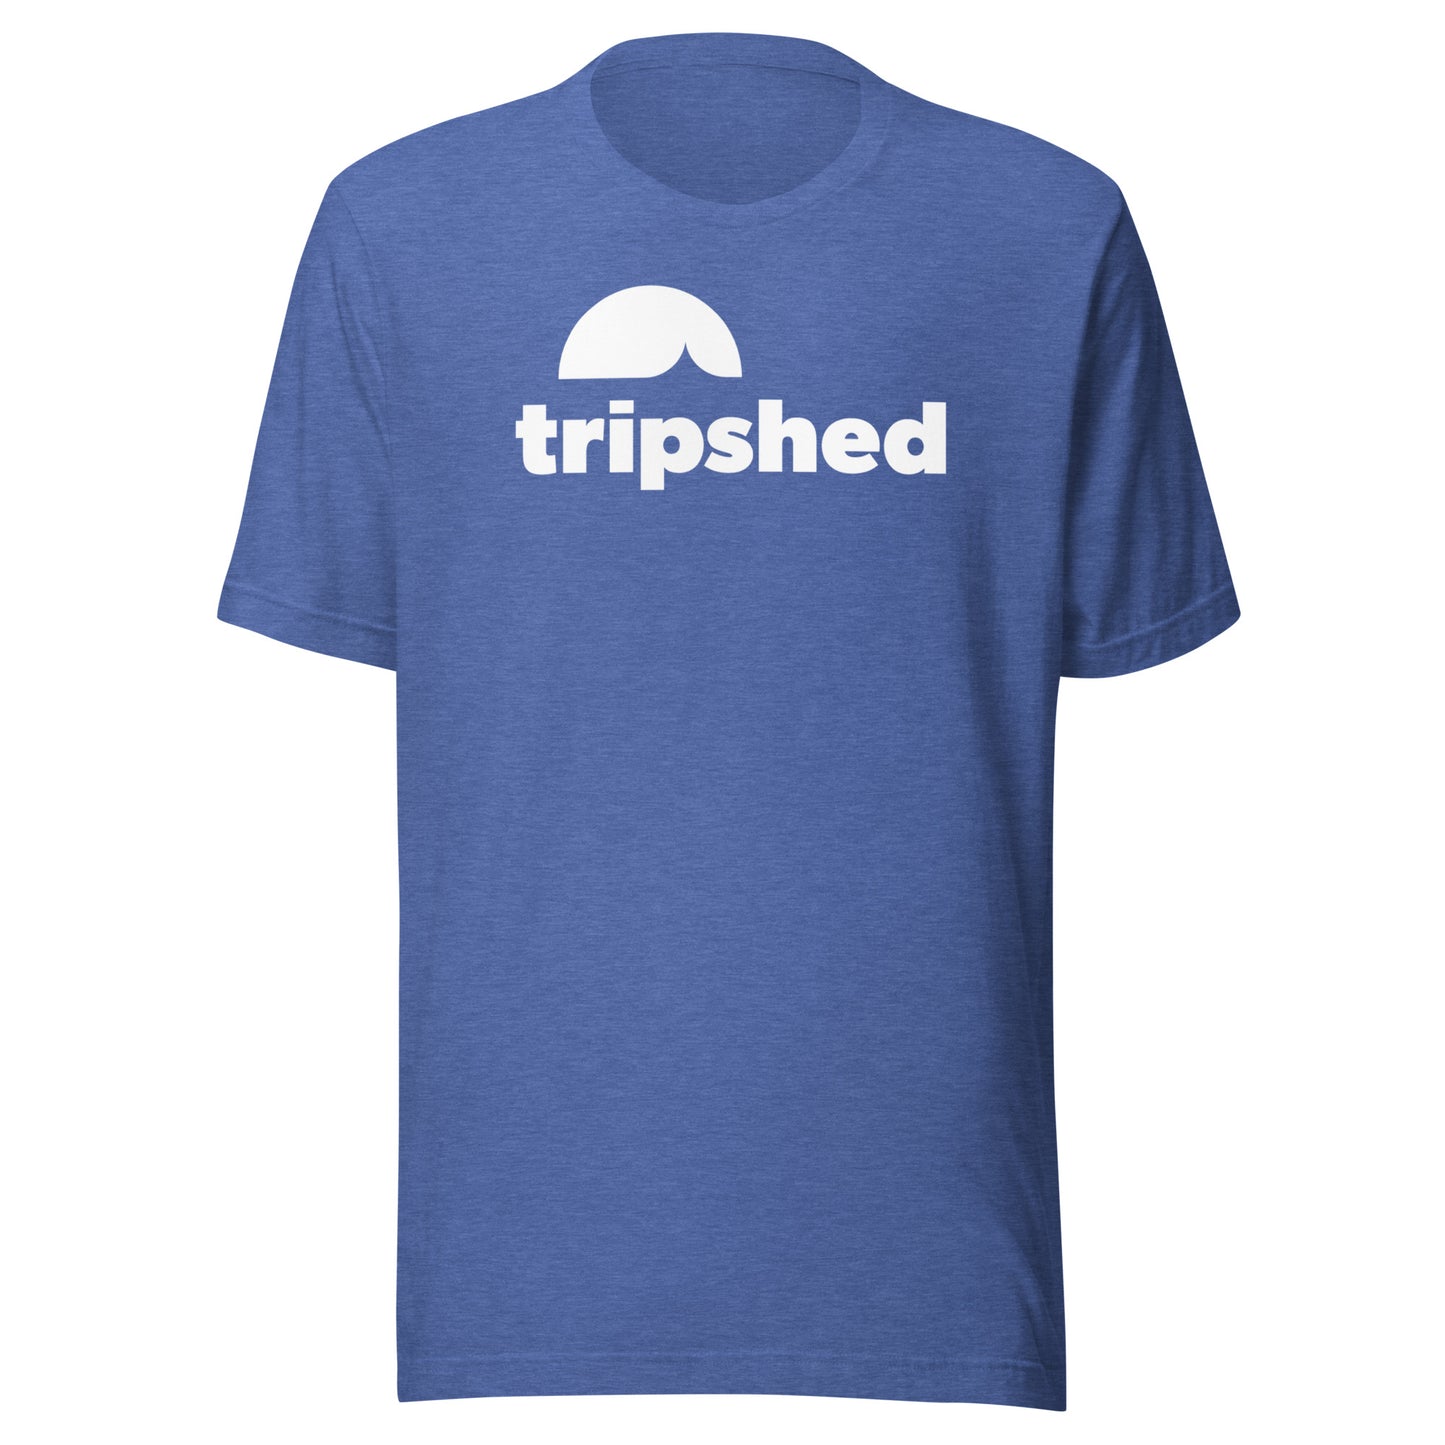 Classic Tripshed Tee